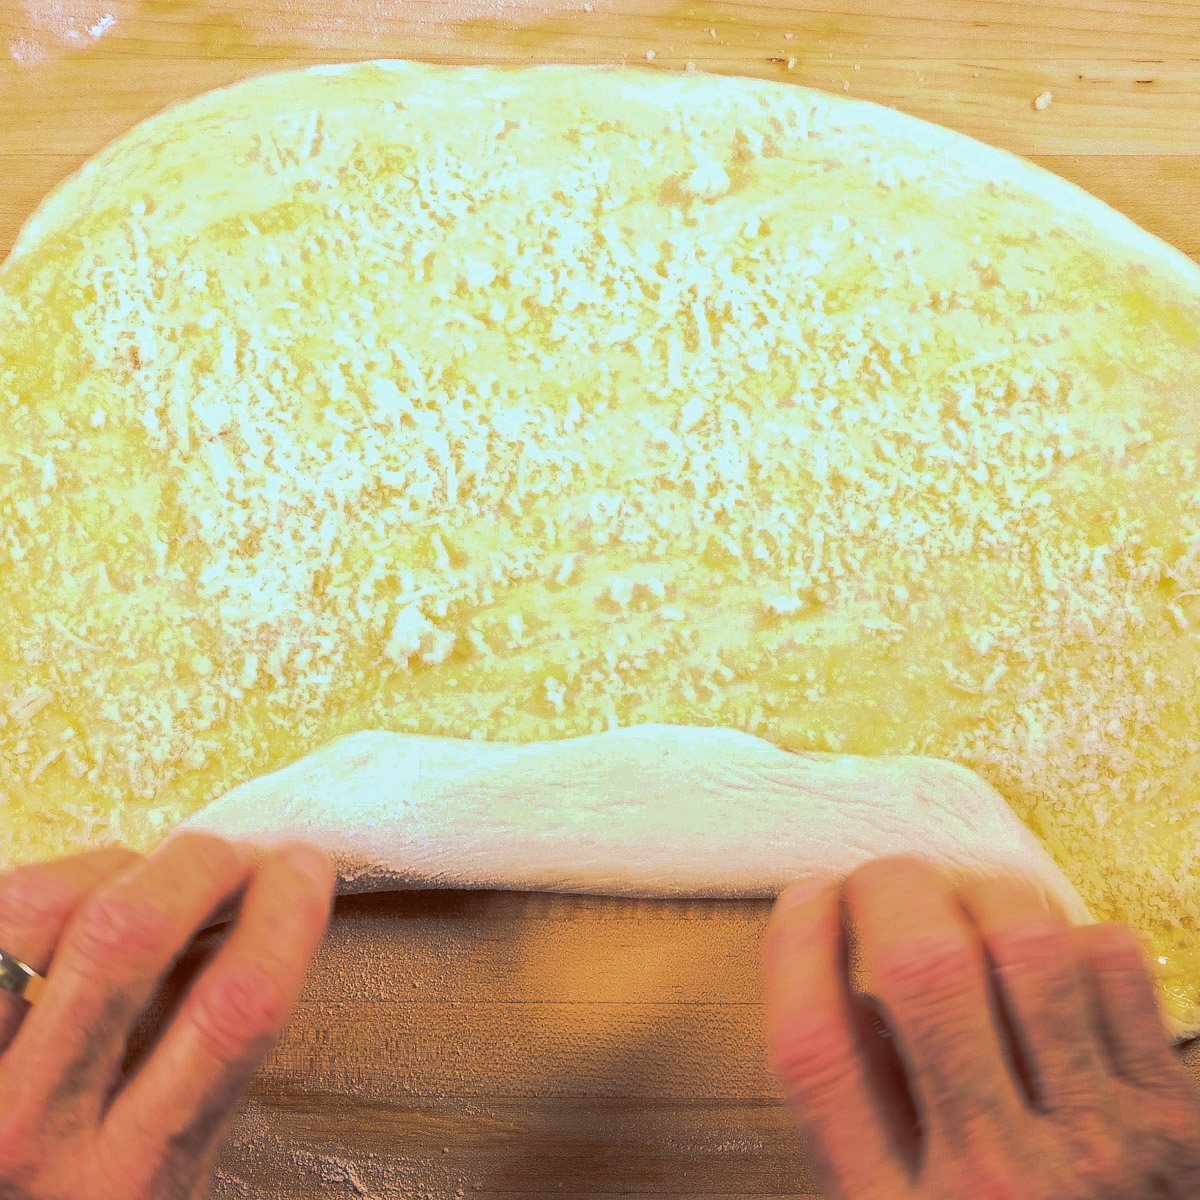 Roll up the dough with cheese and garlic inside.